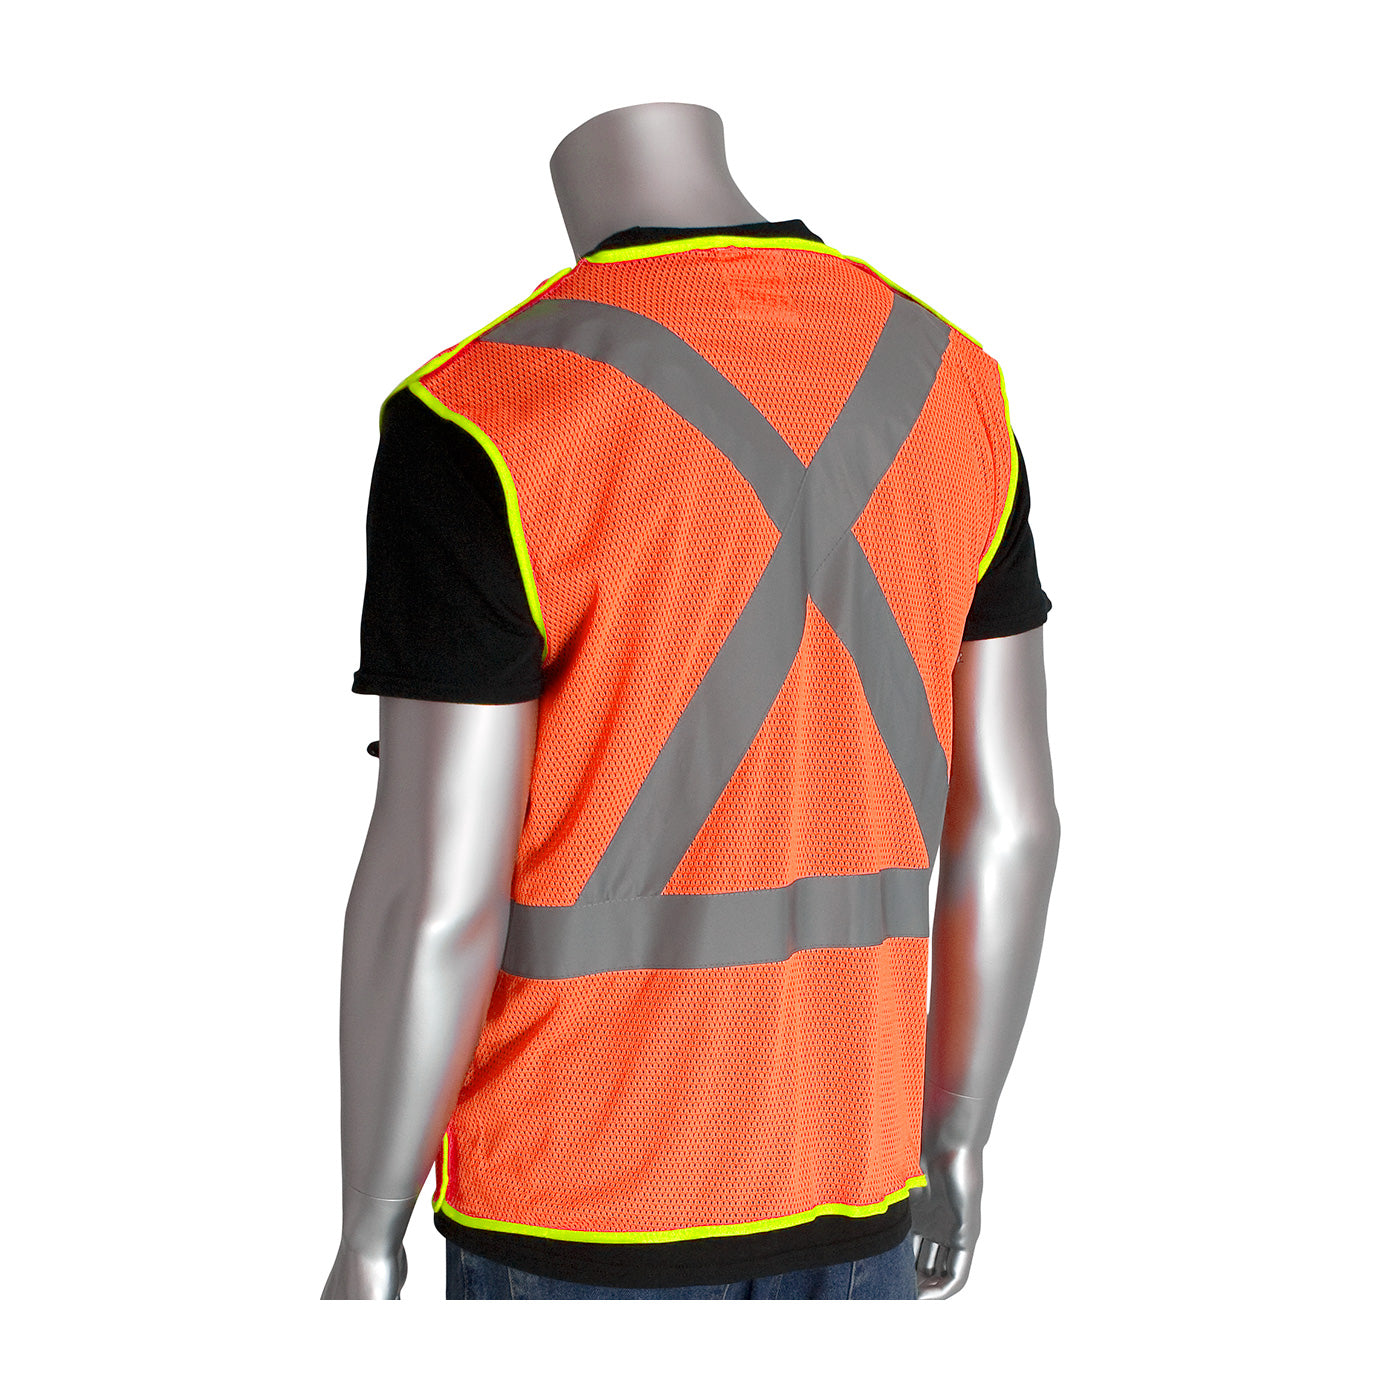 PIP-ANSI Type R Class 2 and CAN/CSA Z96 X-Back Breakaway Mesh Vest